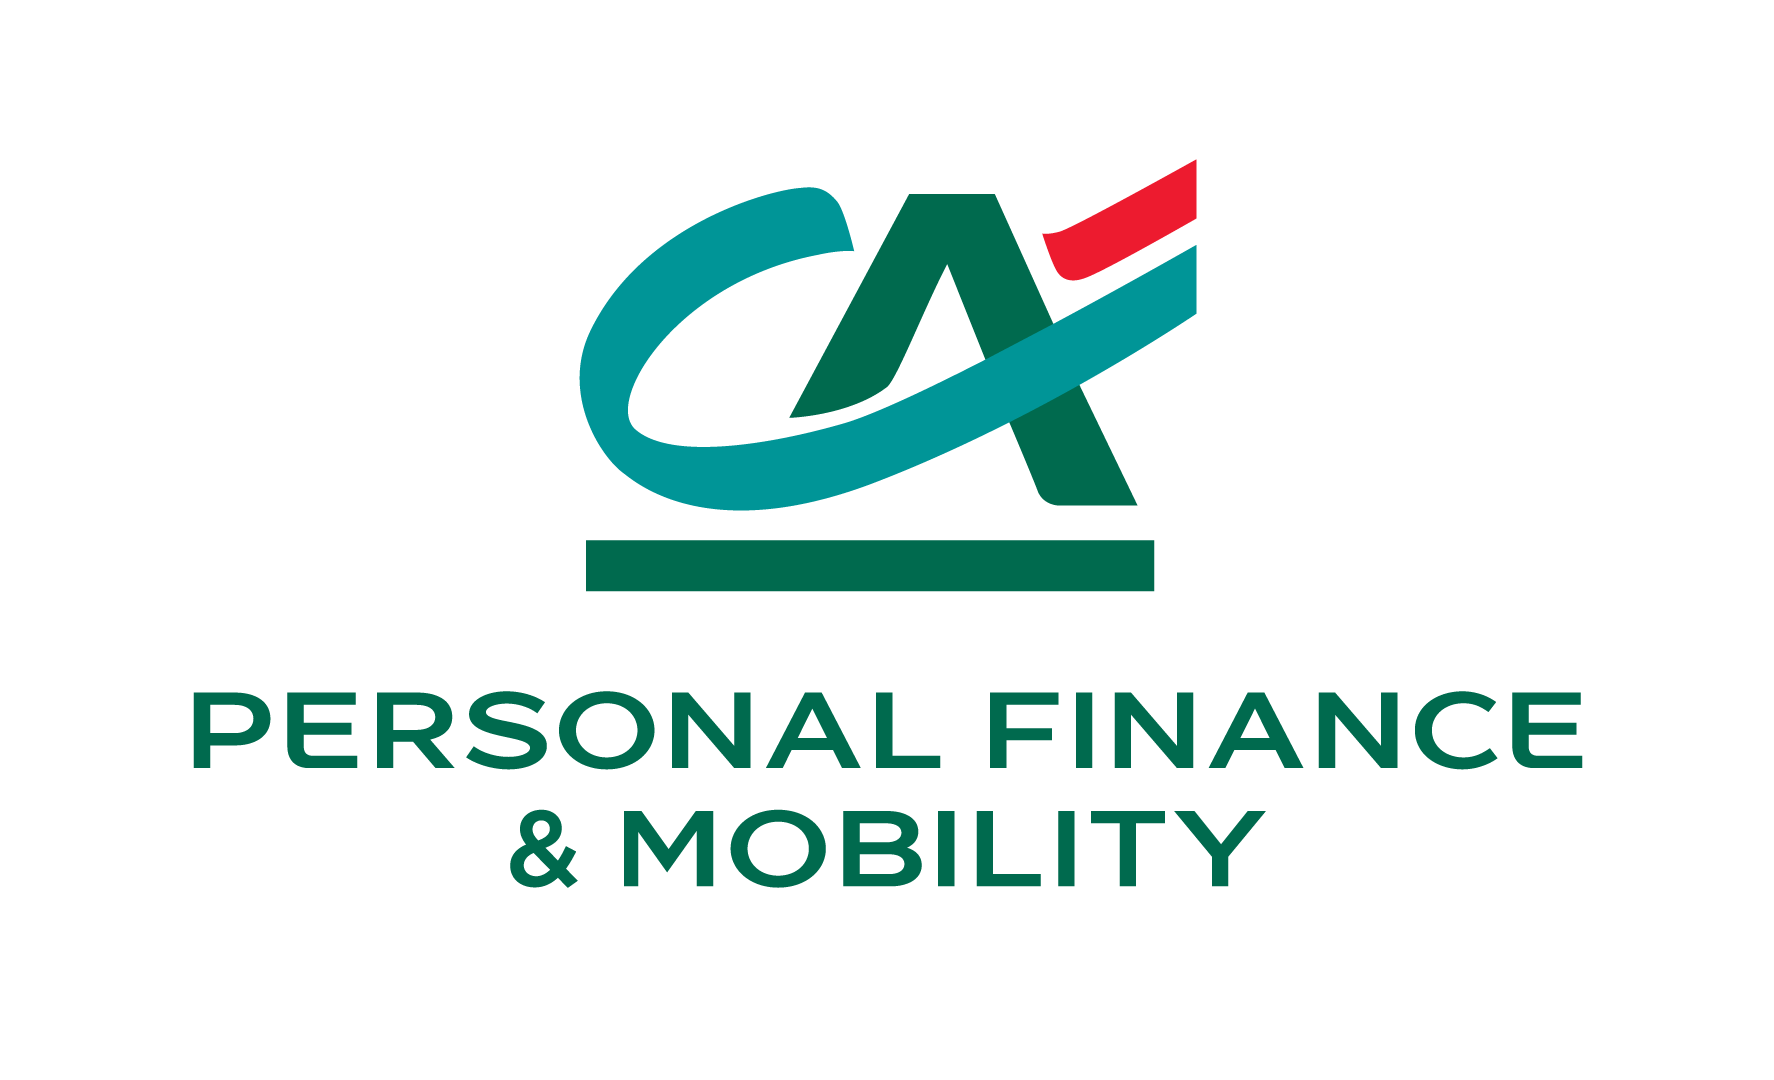 Credit Agricole Personal Finance & Mobility - FIG